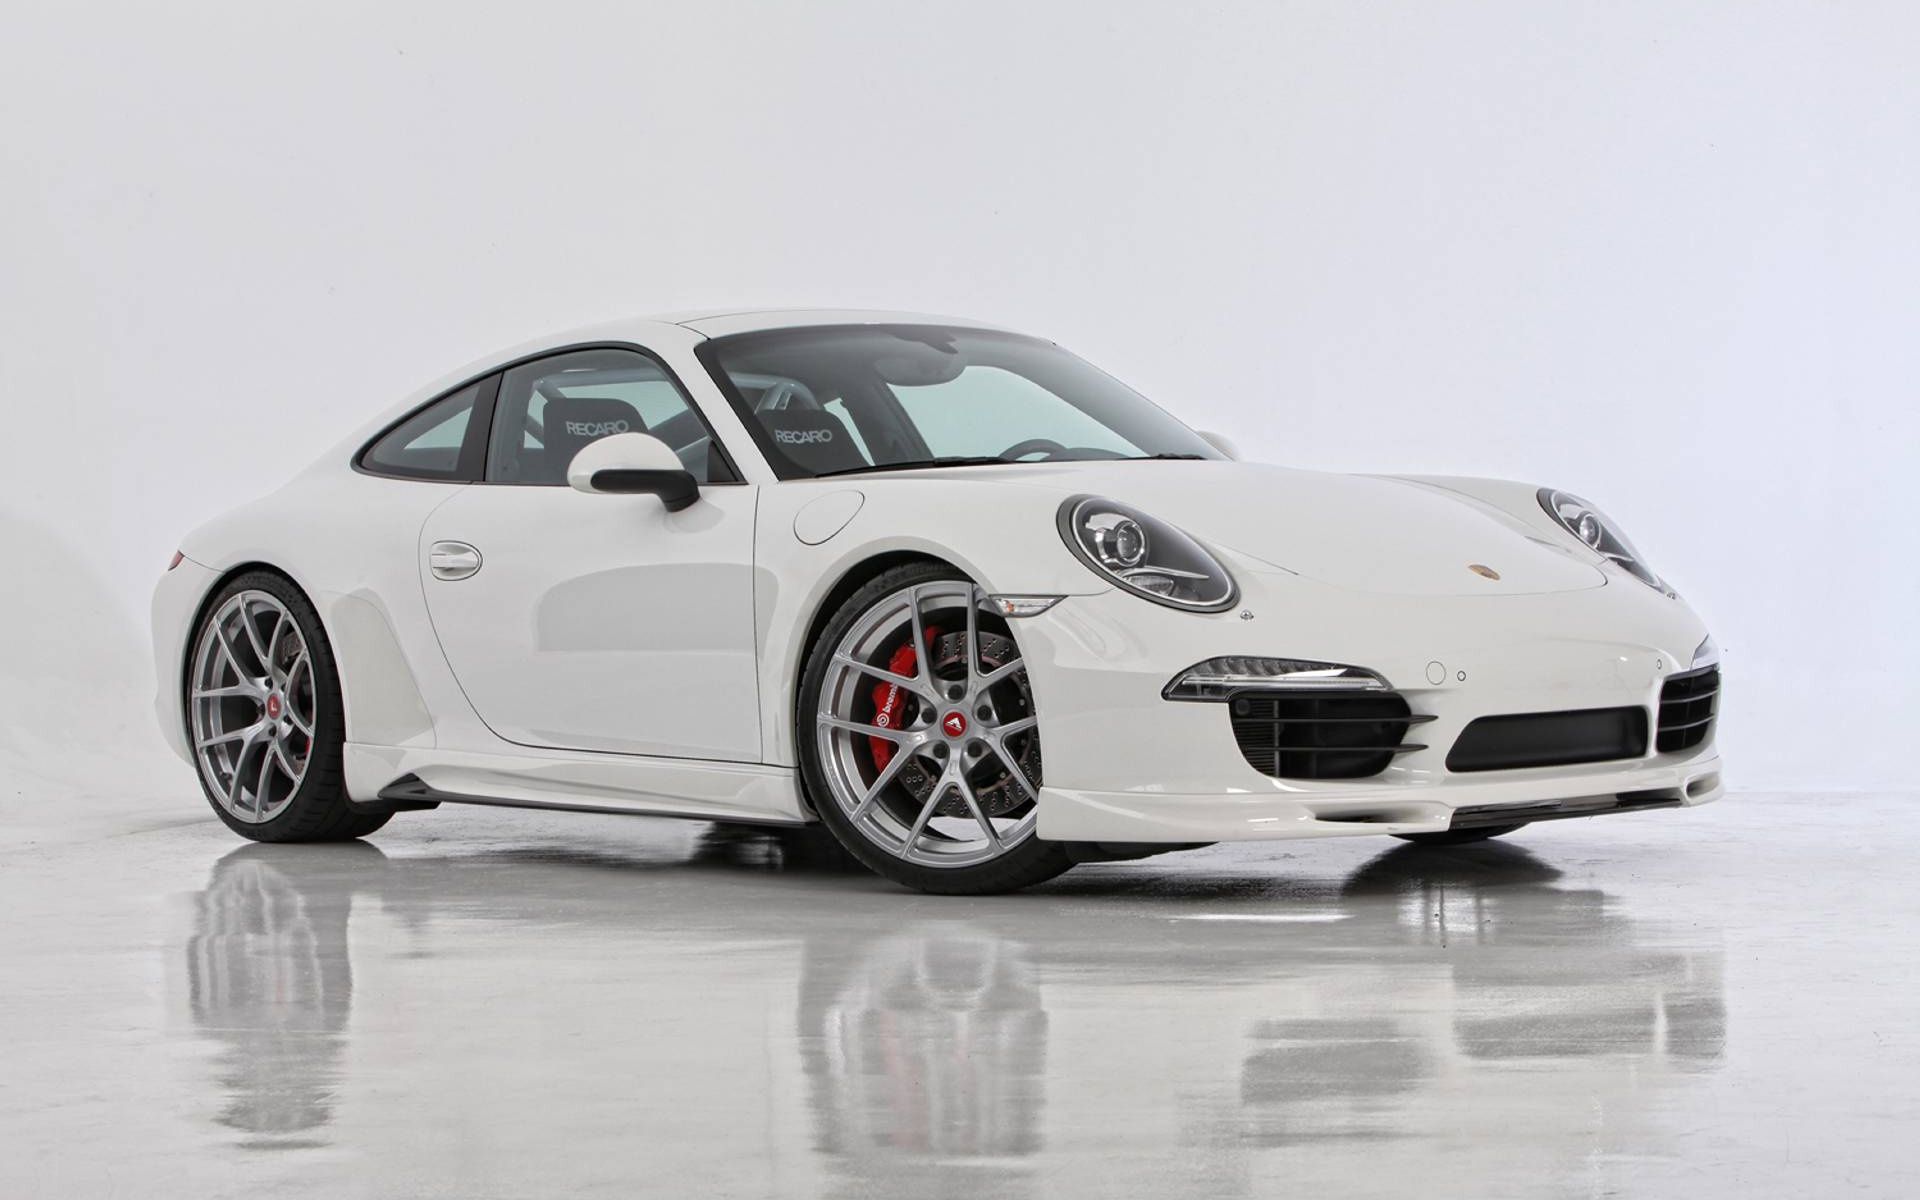 Click To Free Download The Wallpaper A White Porsche Car In Stop ...